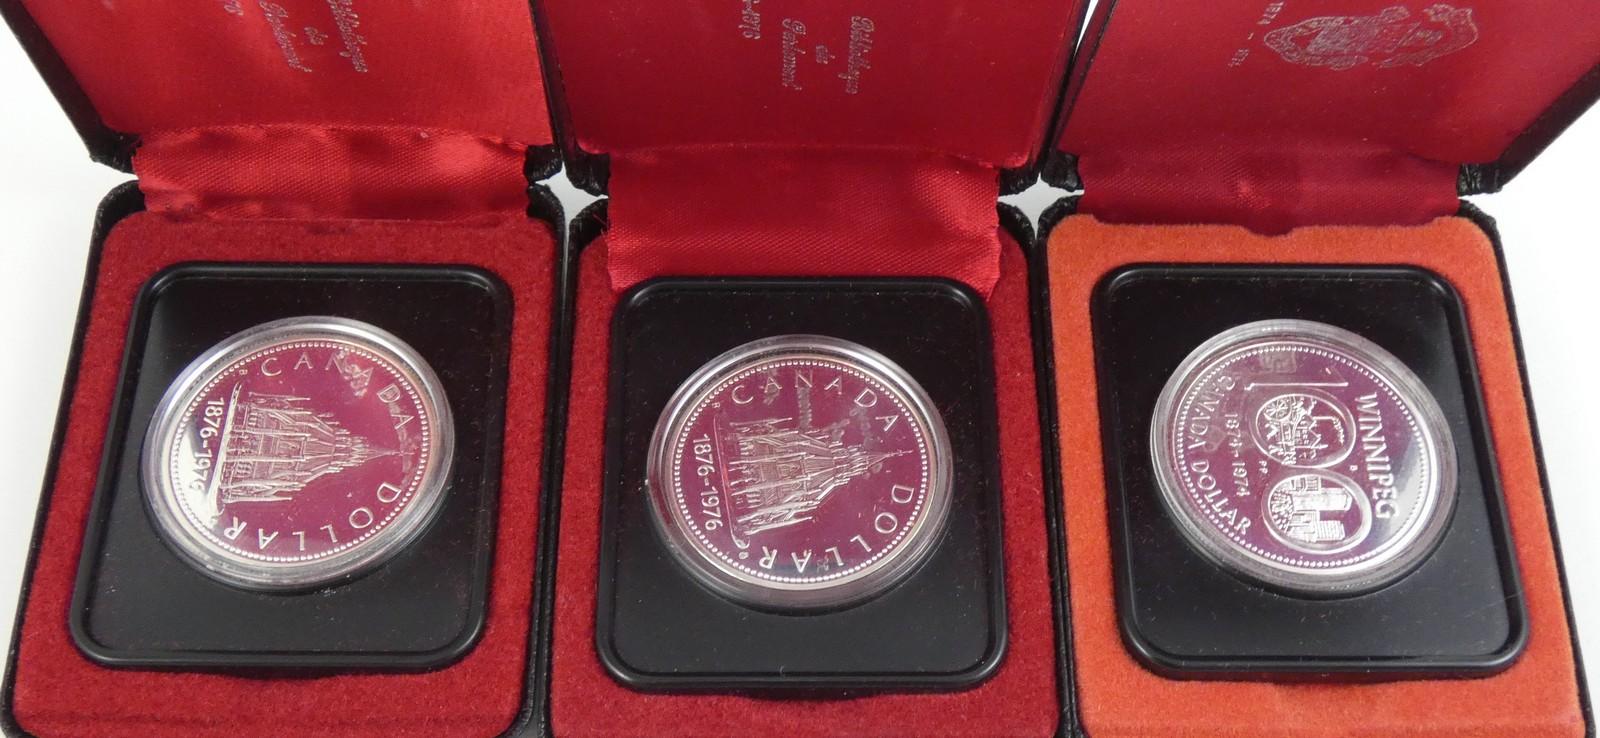 3 CANADIAN SILVER DOLLARS